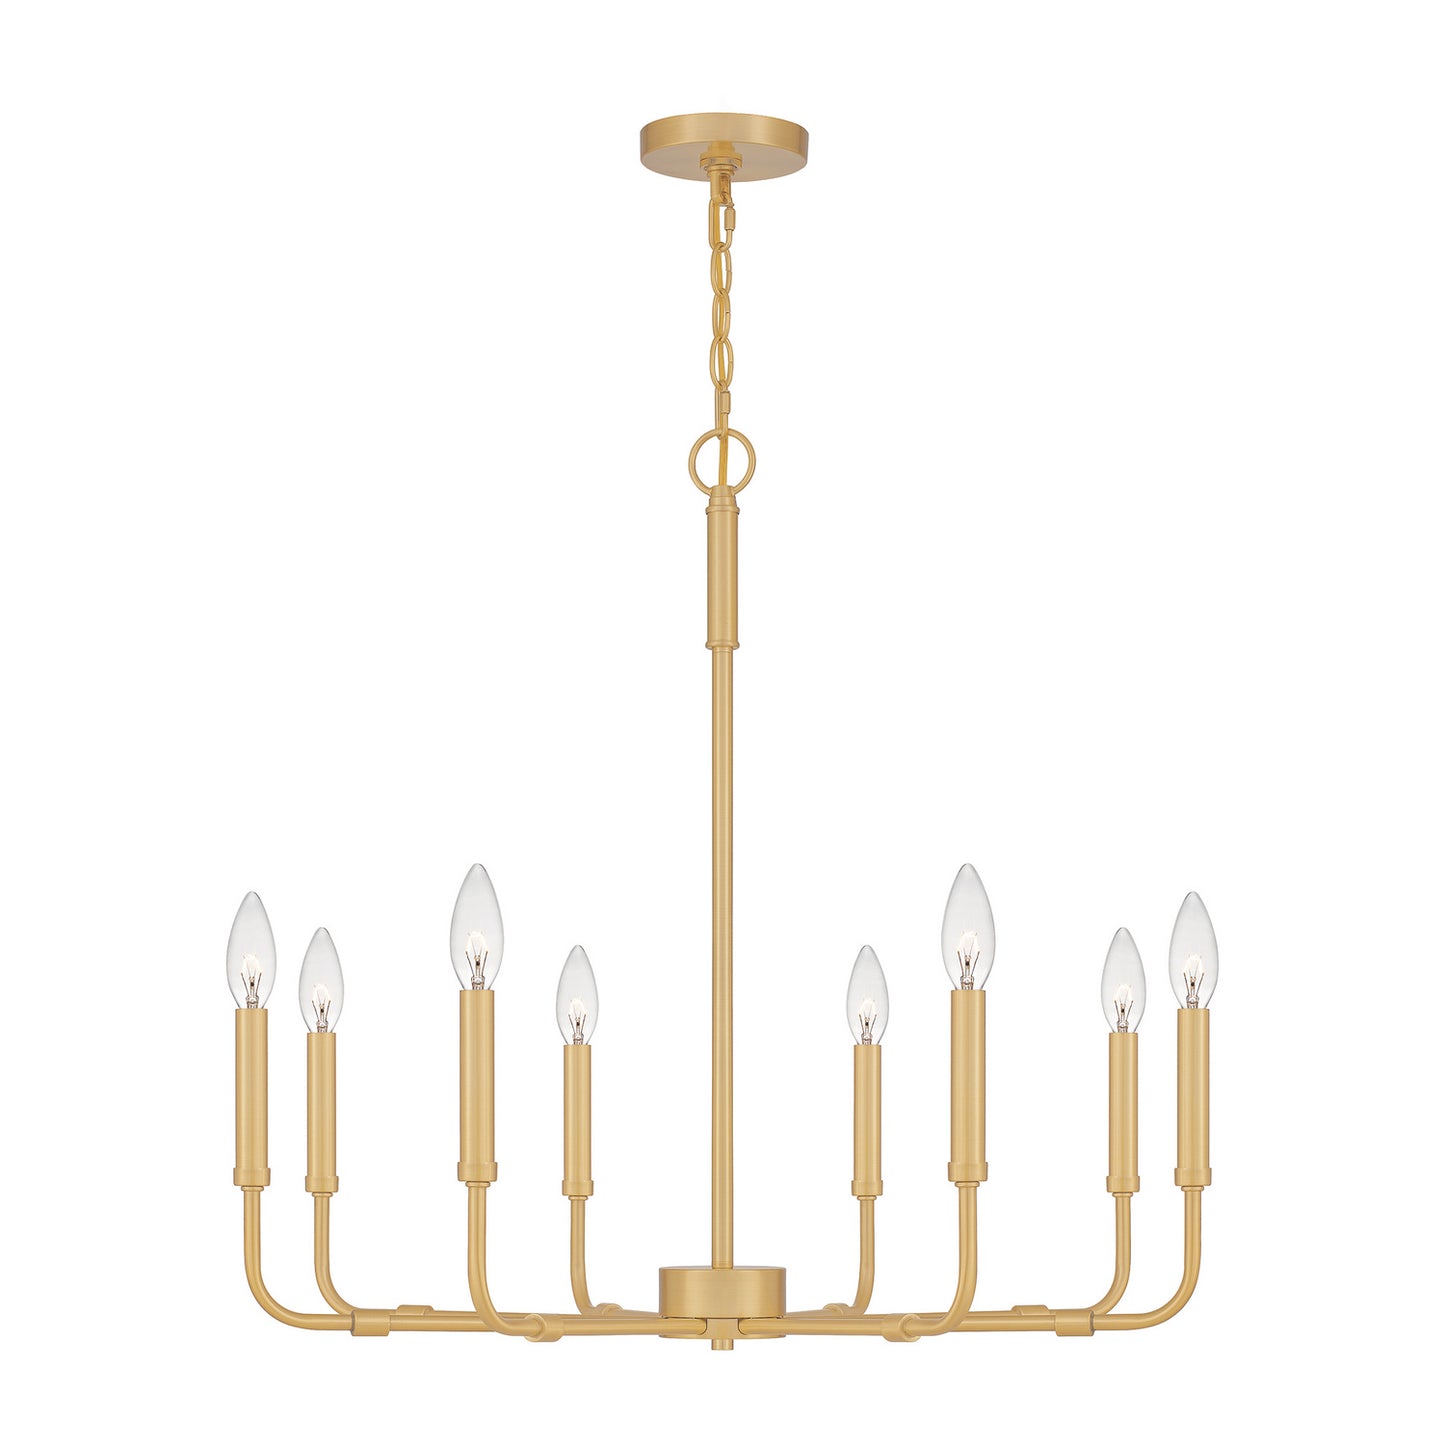 Abner Eight Light Chandelier by Quoizel in Aged Brass Finish (ABR5028AB)